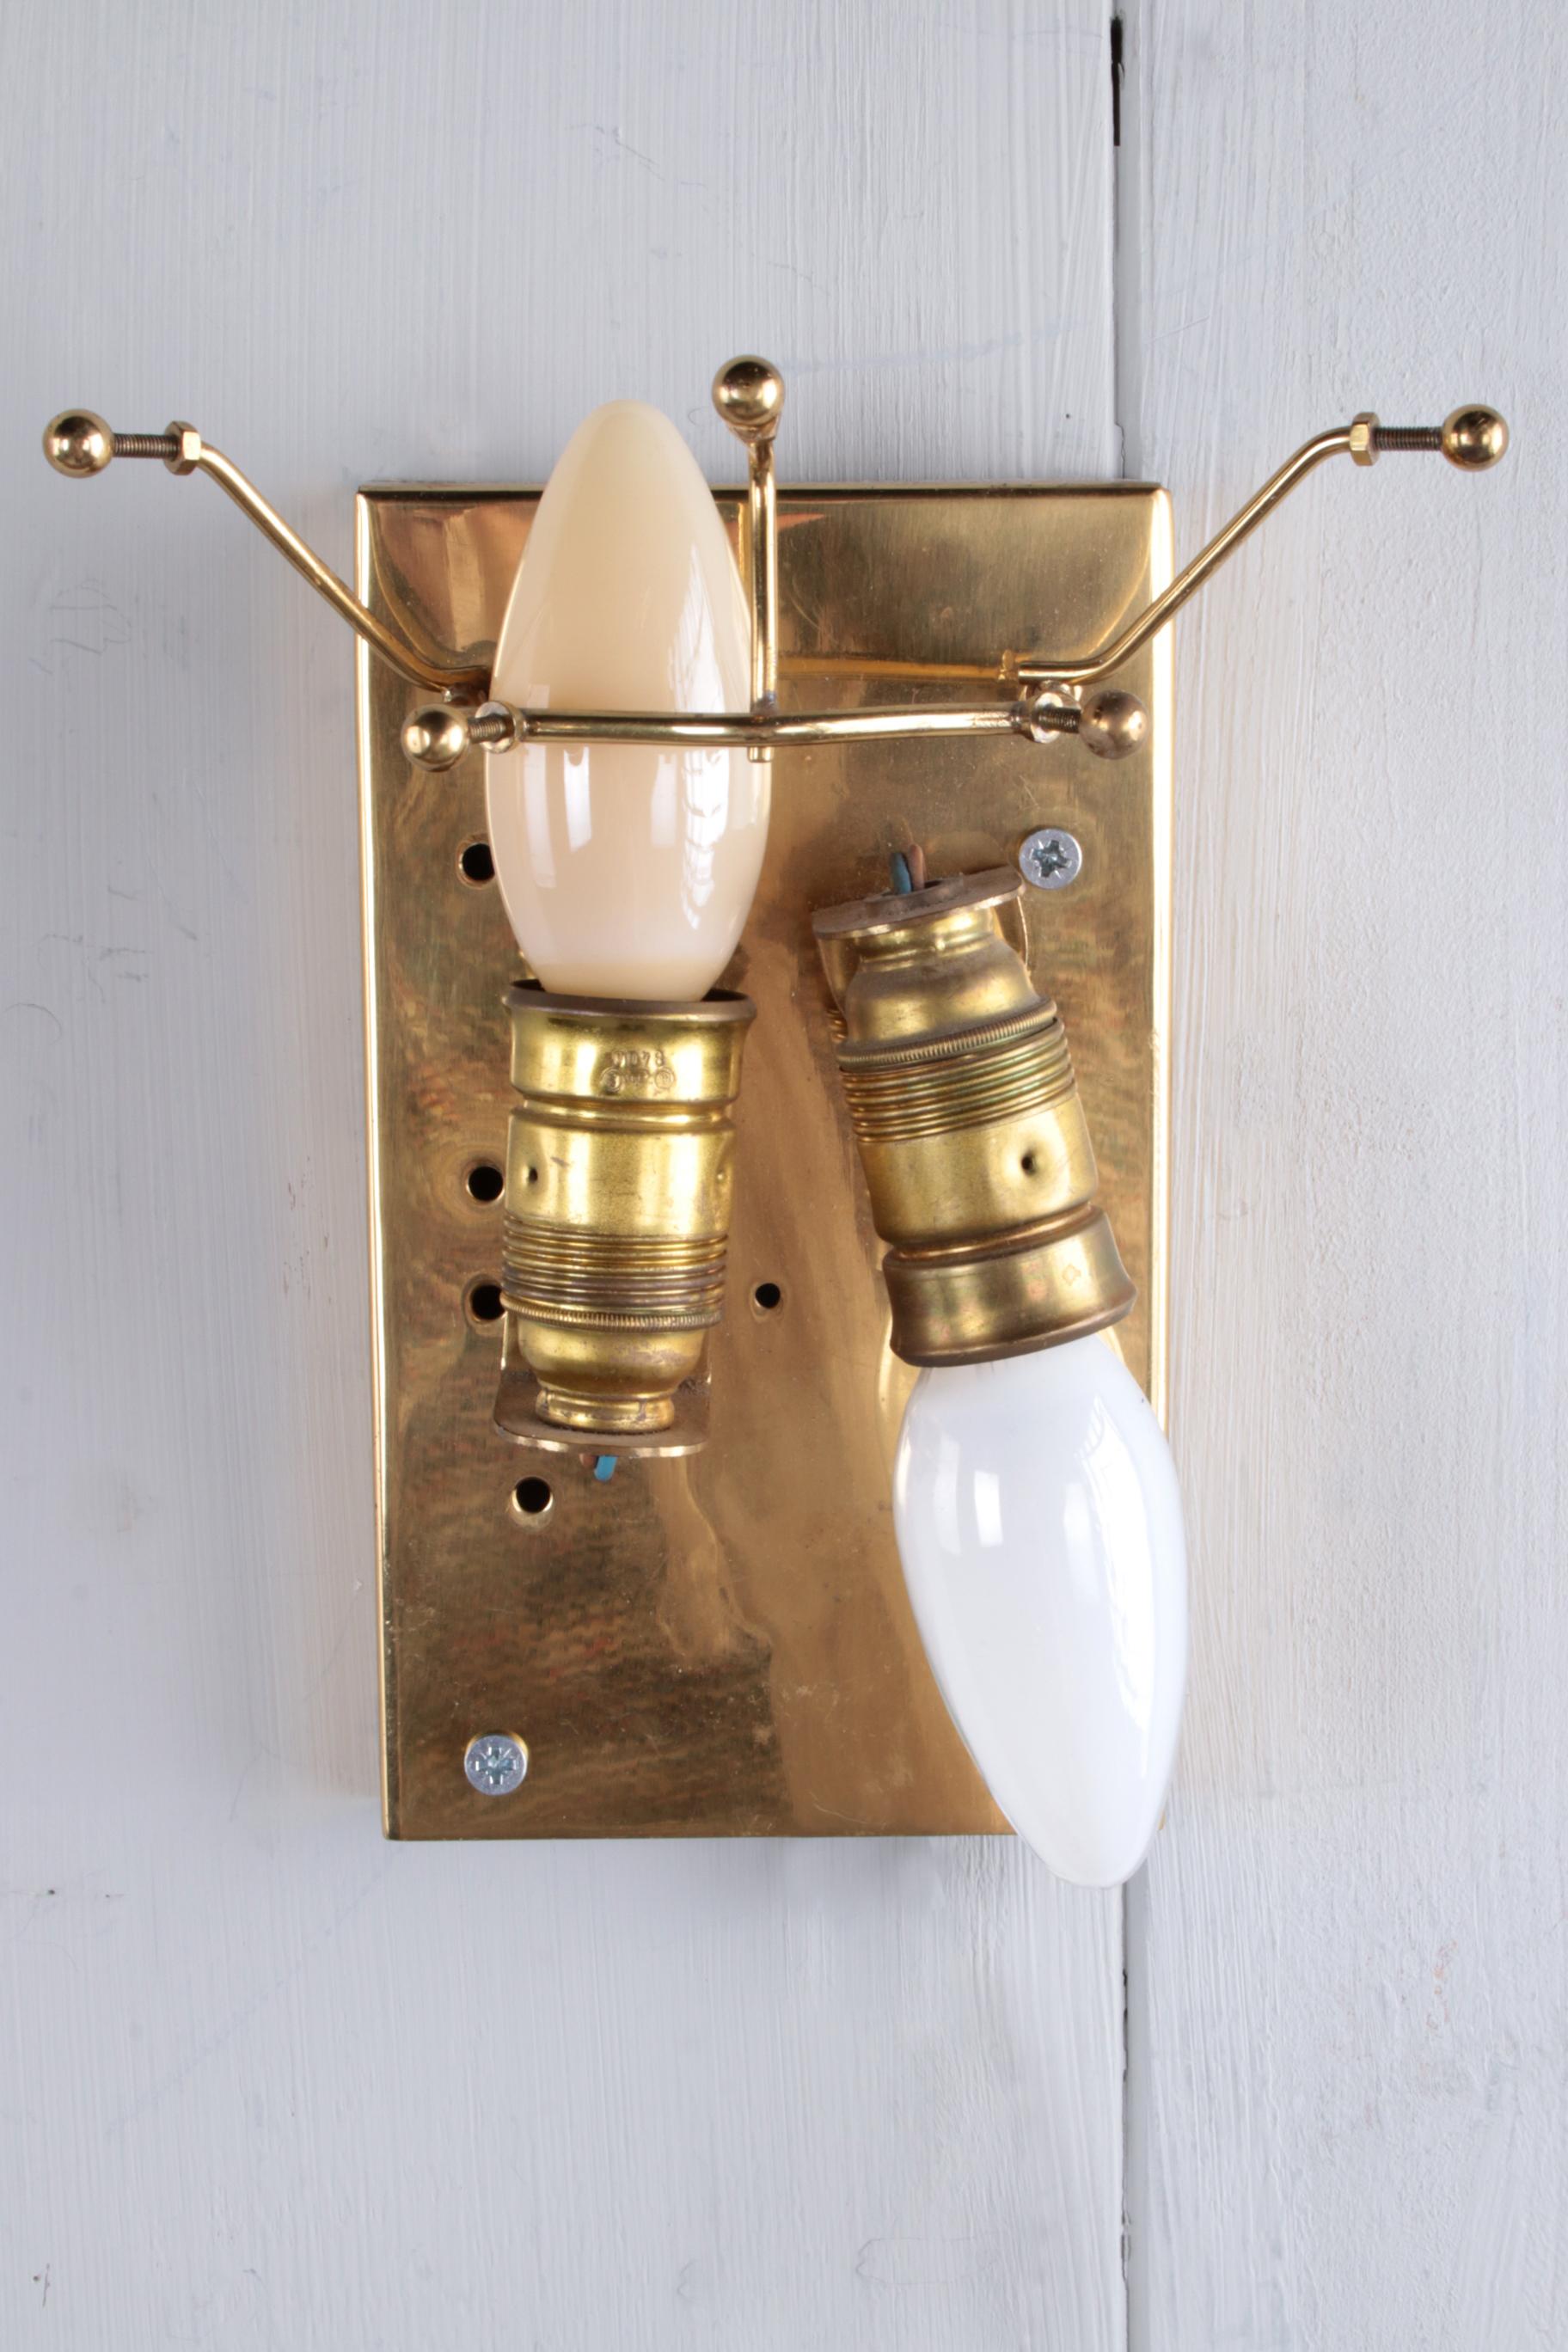 Beautiful and elegant modern brass wall lamps or sconces, 

manufactured by J.T. Kalmar in Austria around the 1960s.

Stylish design, executed to a very high standard. Five solid glass chains dangle from each wall lamp.

The clean lines in the